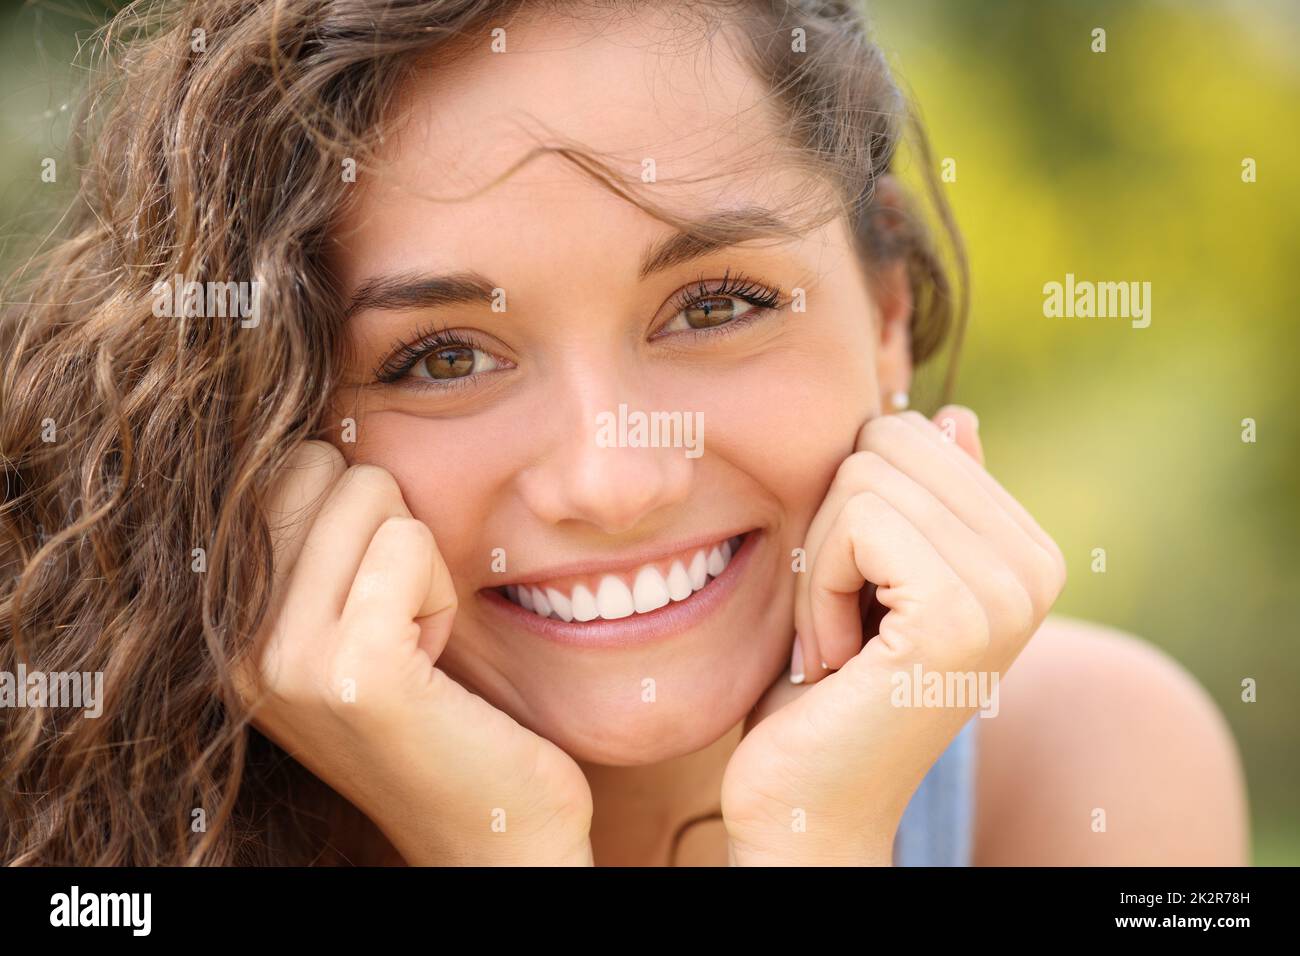 Beautiful woman with perfect white smile looks at camera Stock Photo